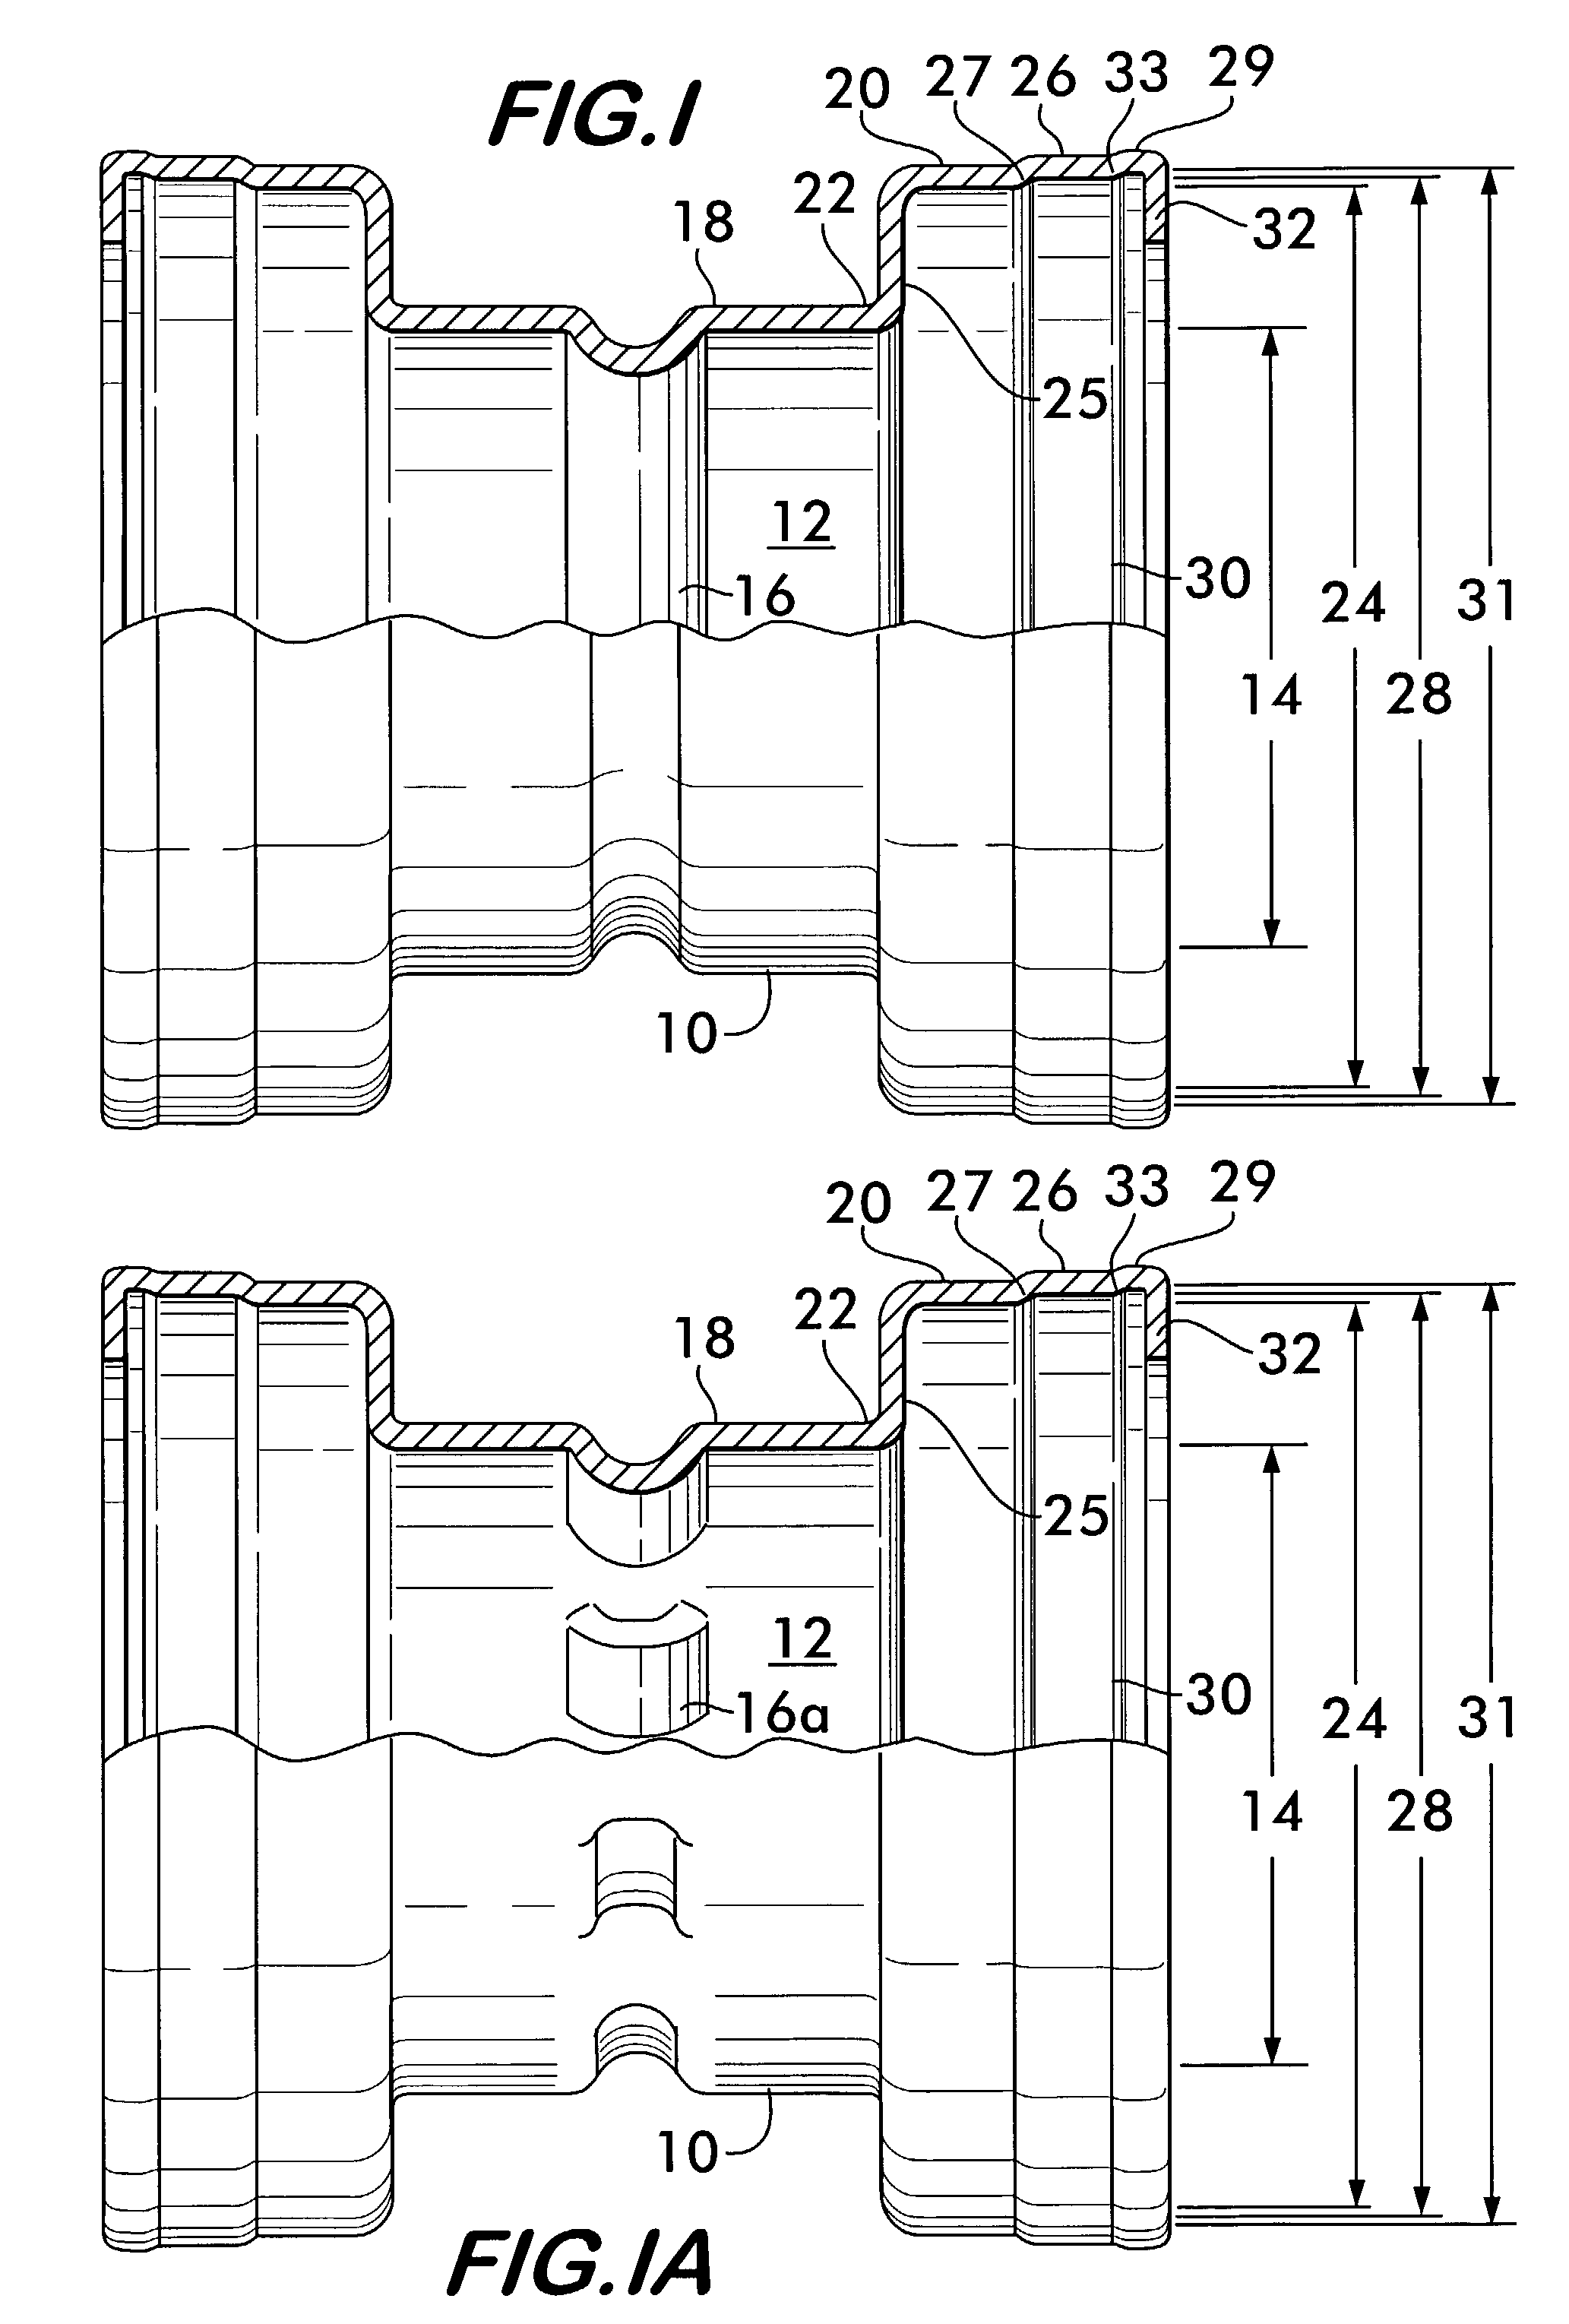 Triple-expanded mechanical pipe coupling derived from a standard fitting